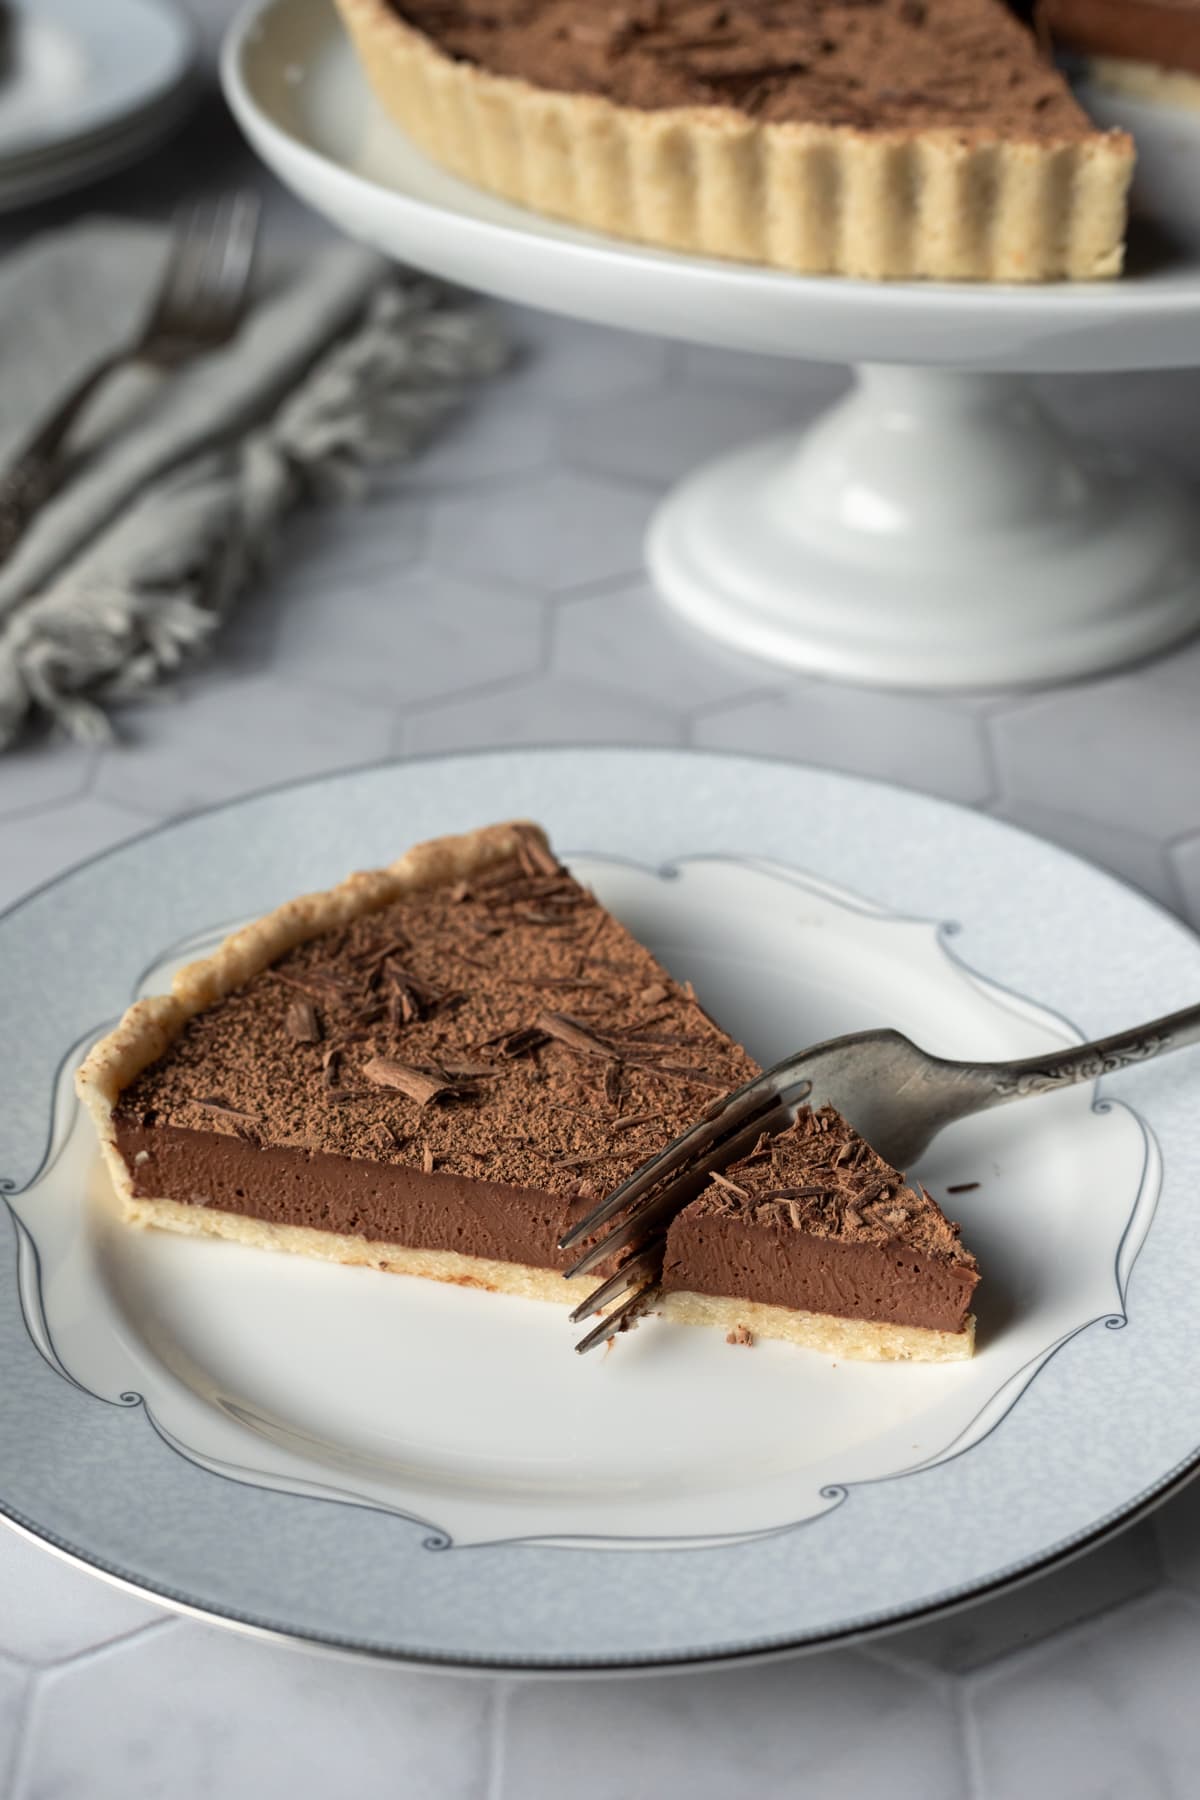 a fork cutting into a slice of chocolate tart on a small plate.